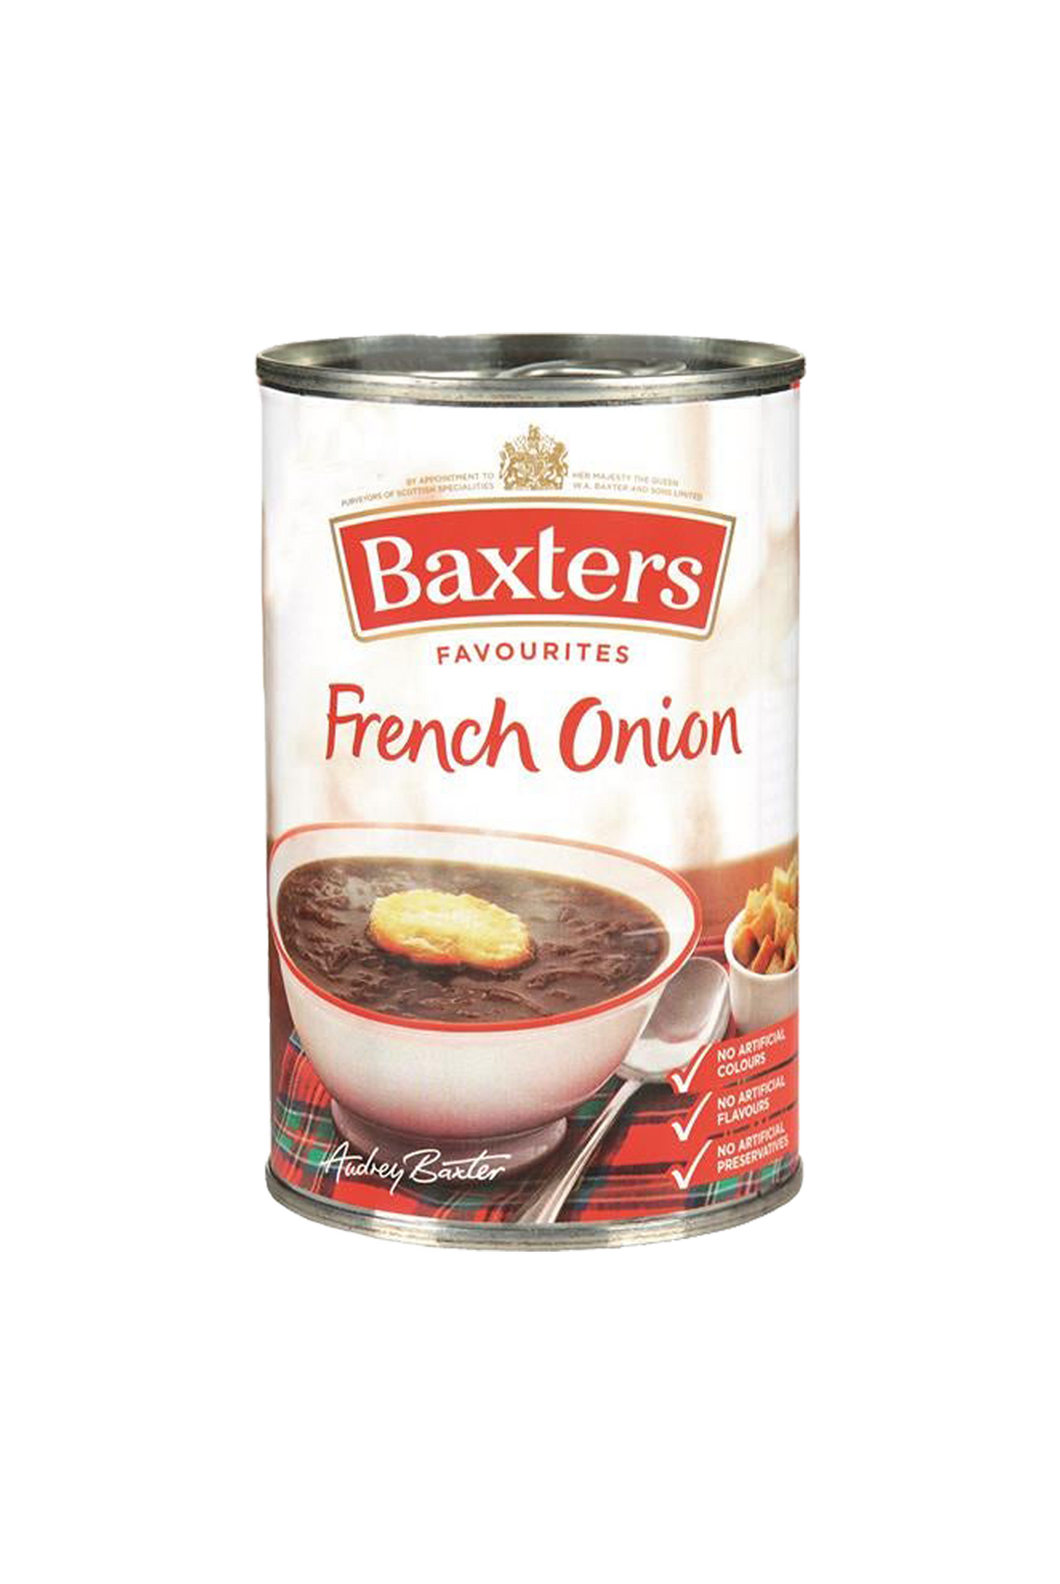 Baxters Favourites French Onion 400g